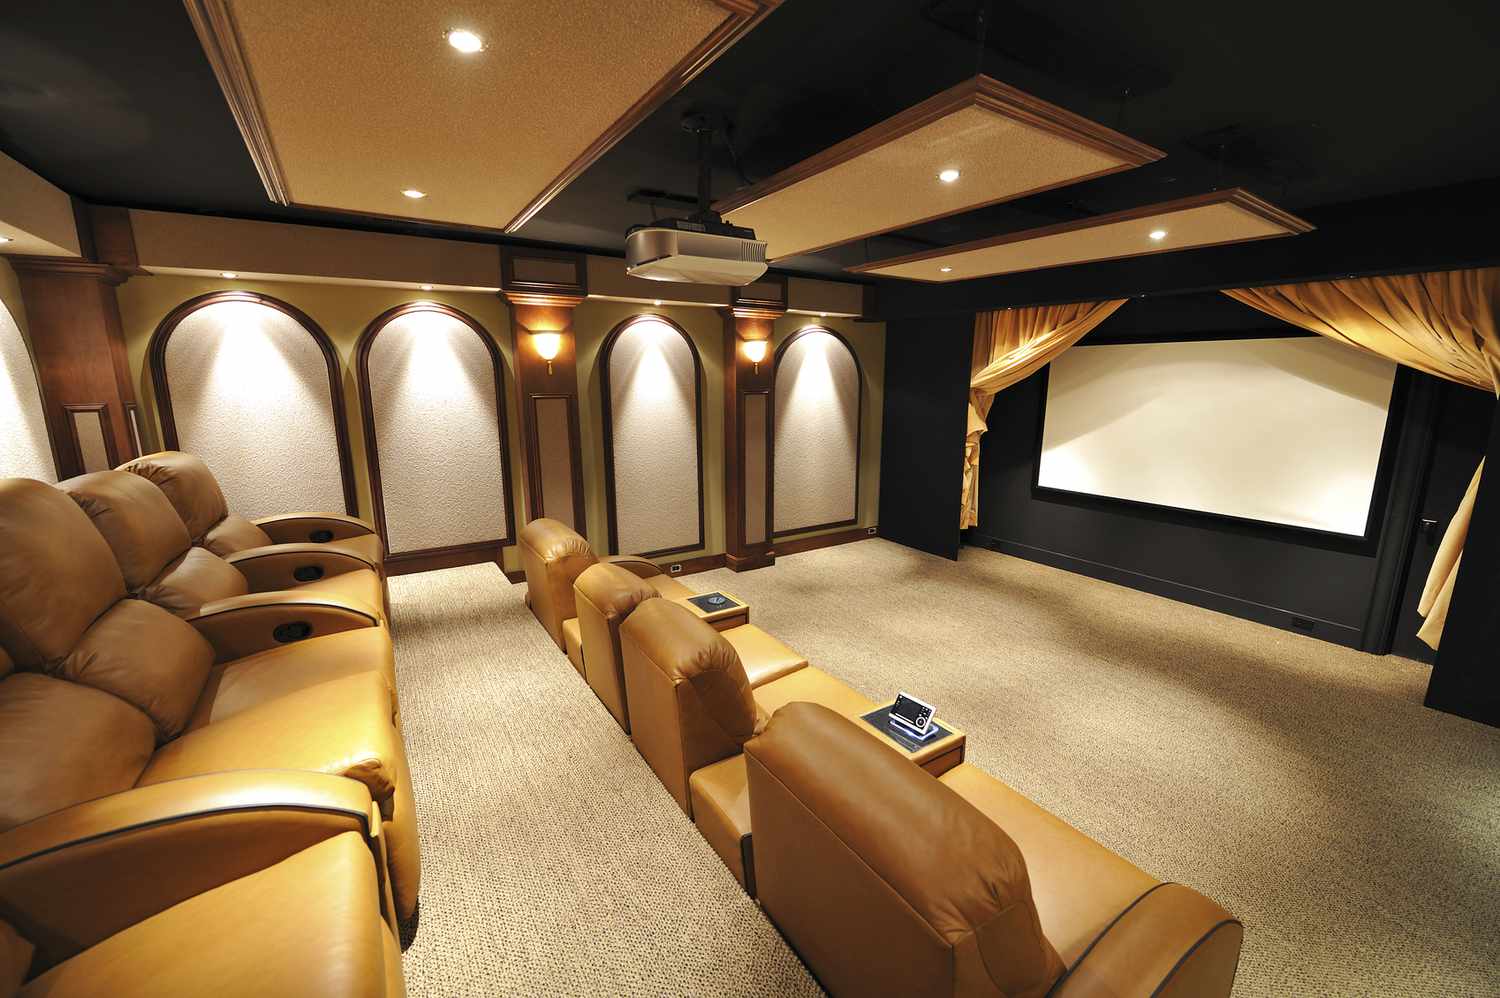 5 Things You Should Consider When Building a Custom Home Theater